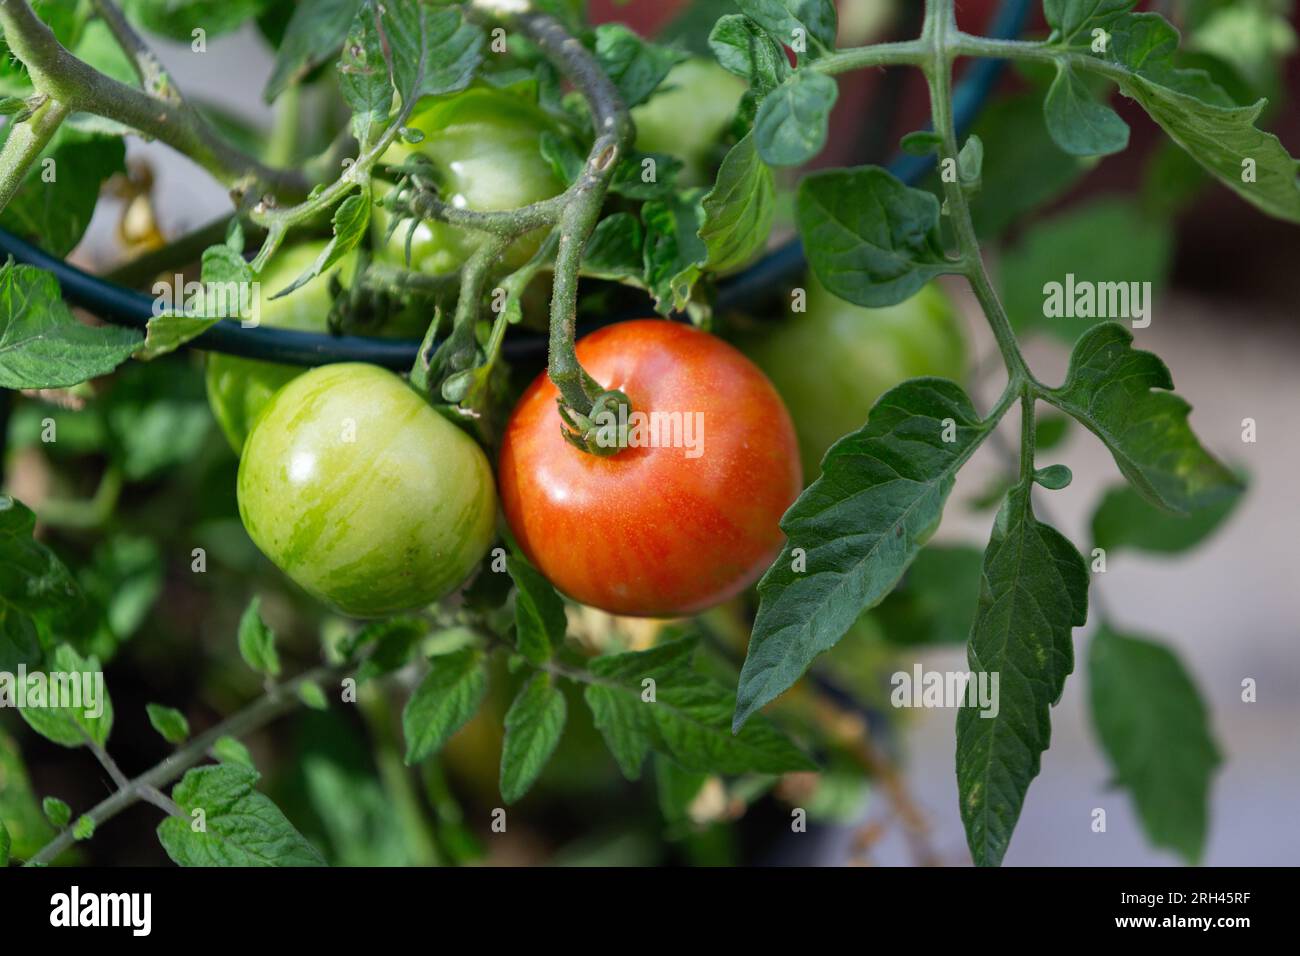 A tomato plant. One ripe and one green tomato growing on a truss. Stock Photo